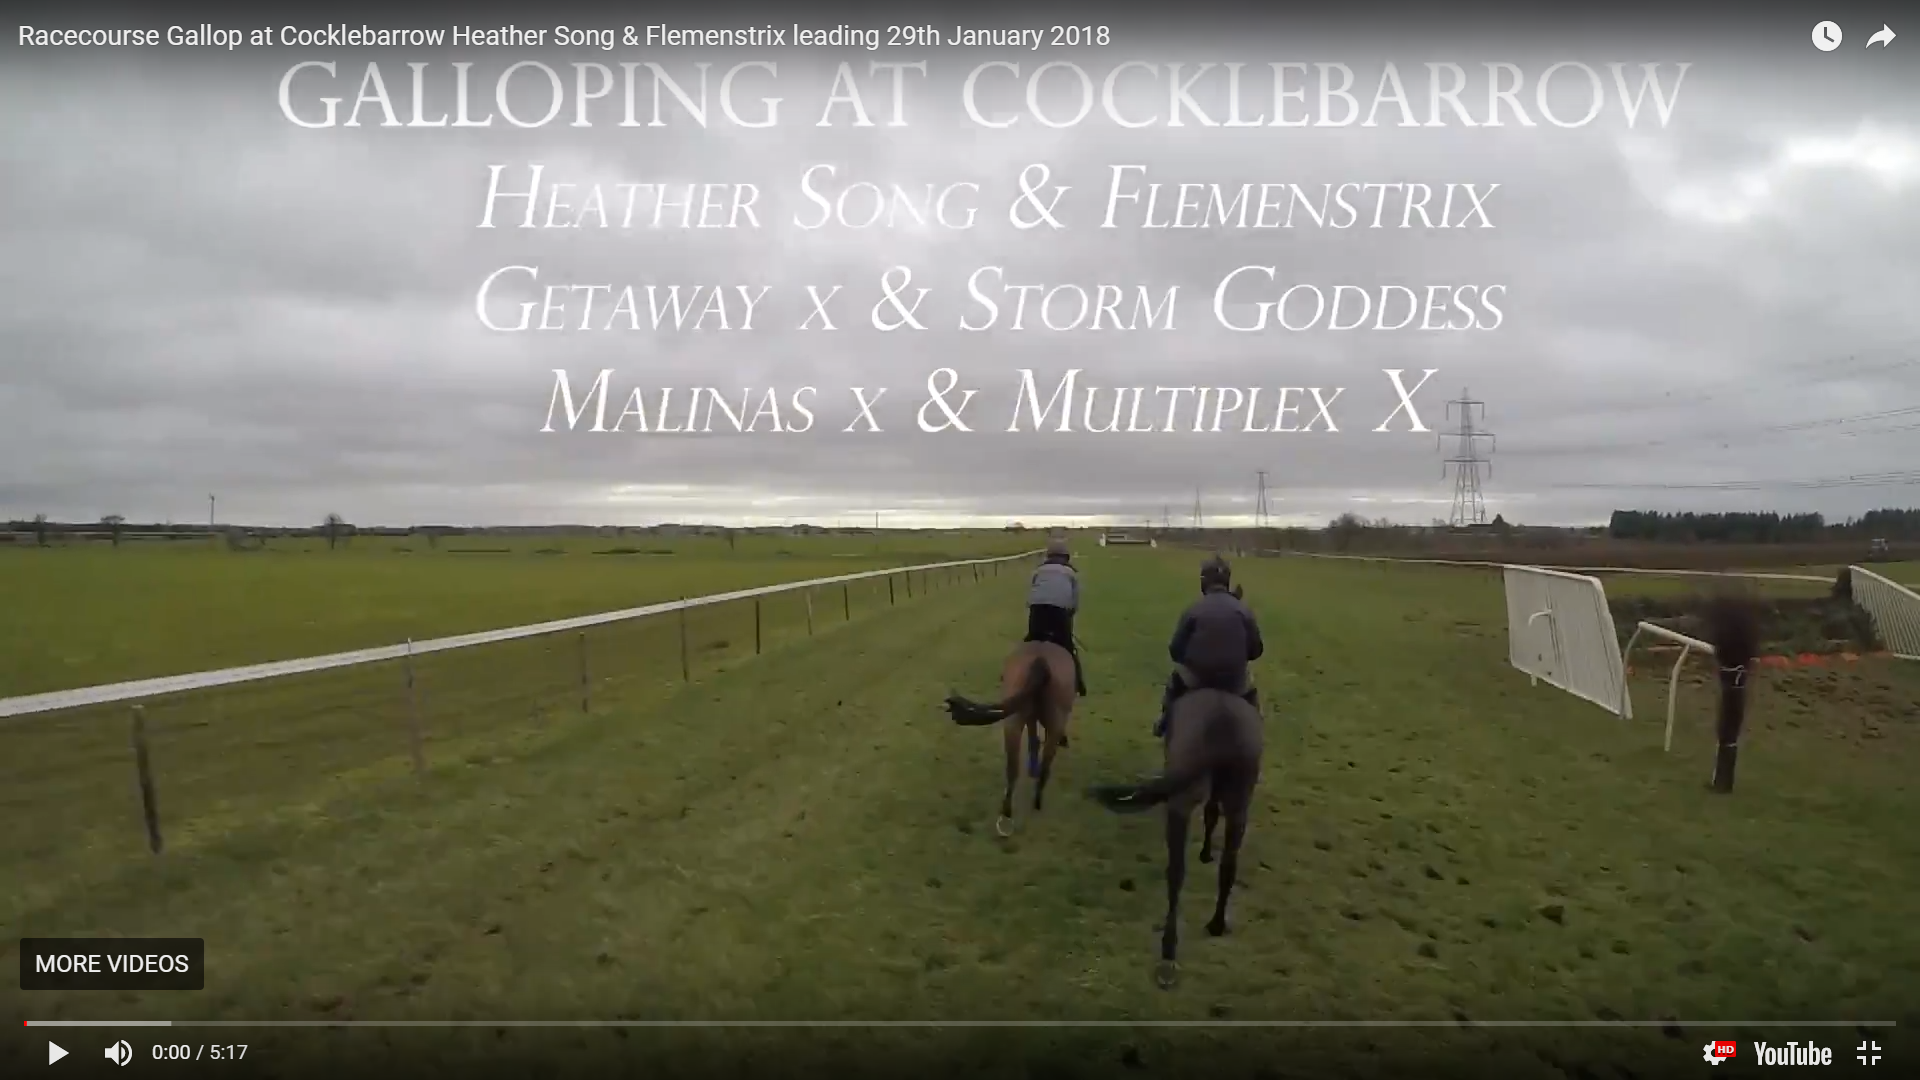 Racecourse Gallop at Cocklebarrow Heather Song & Flemenstrix leading 29th January 2018